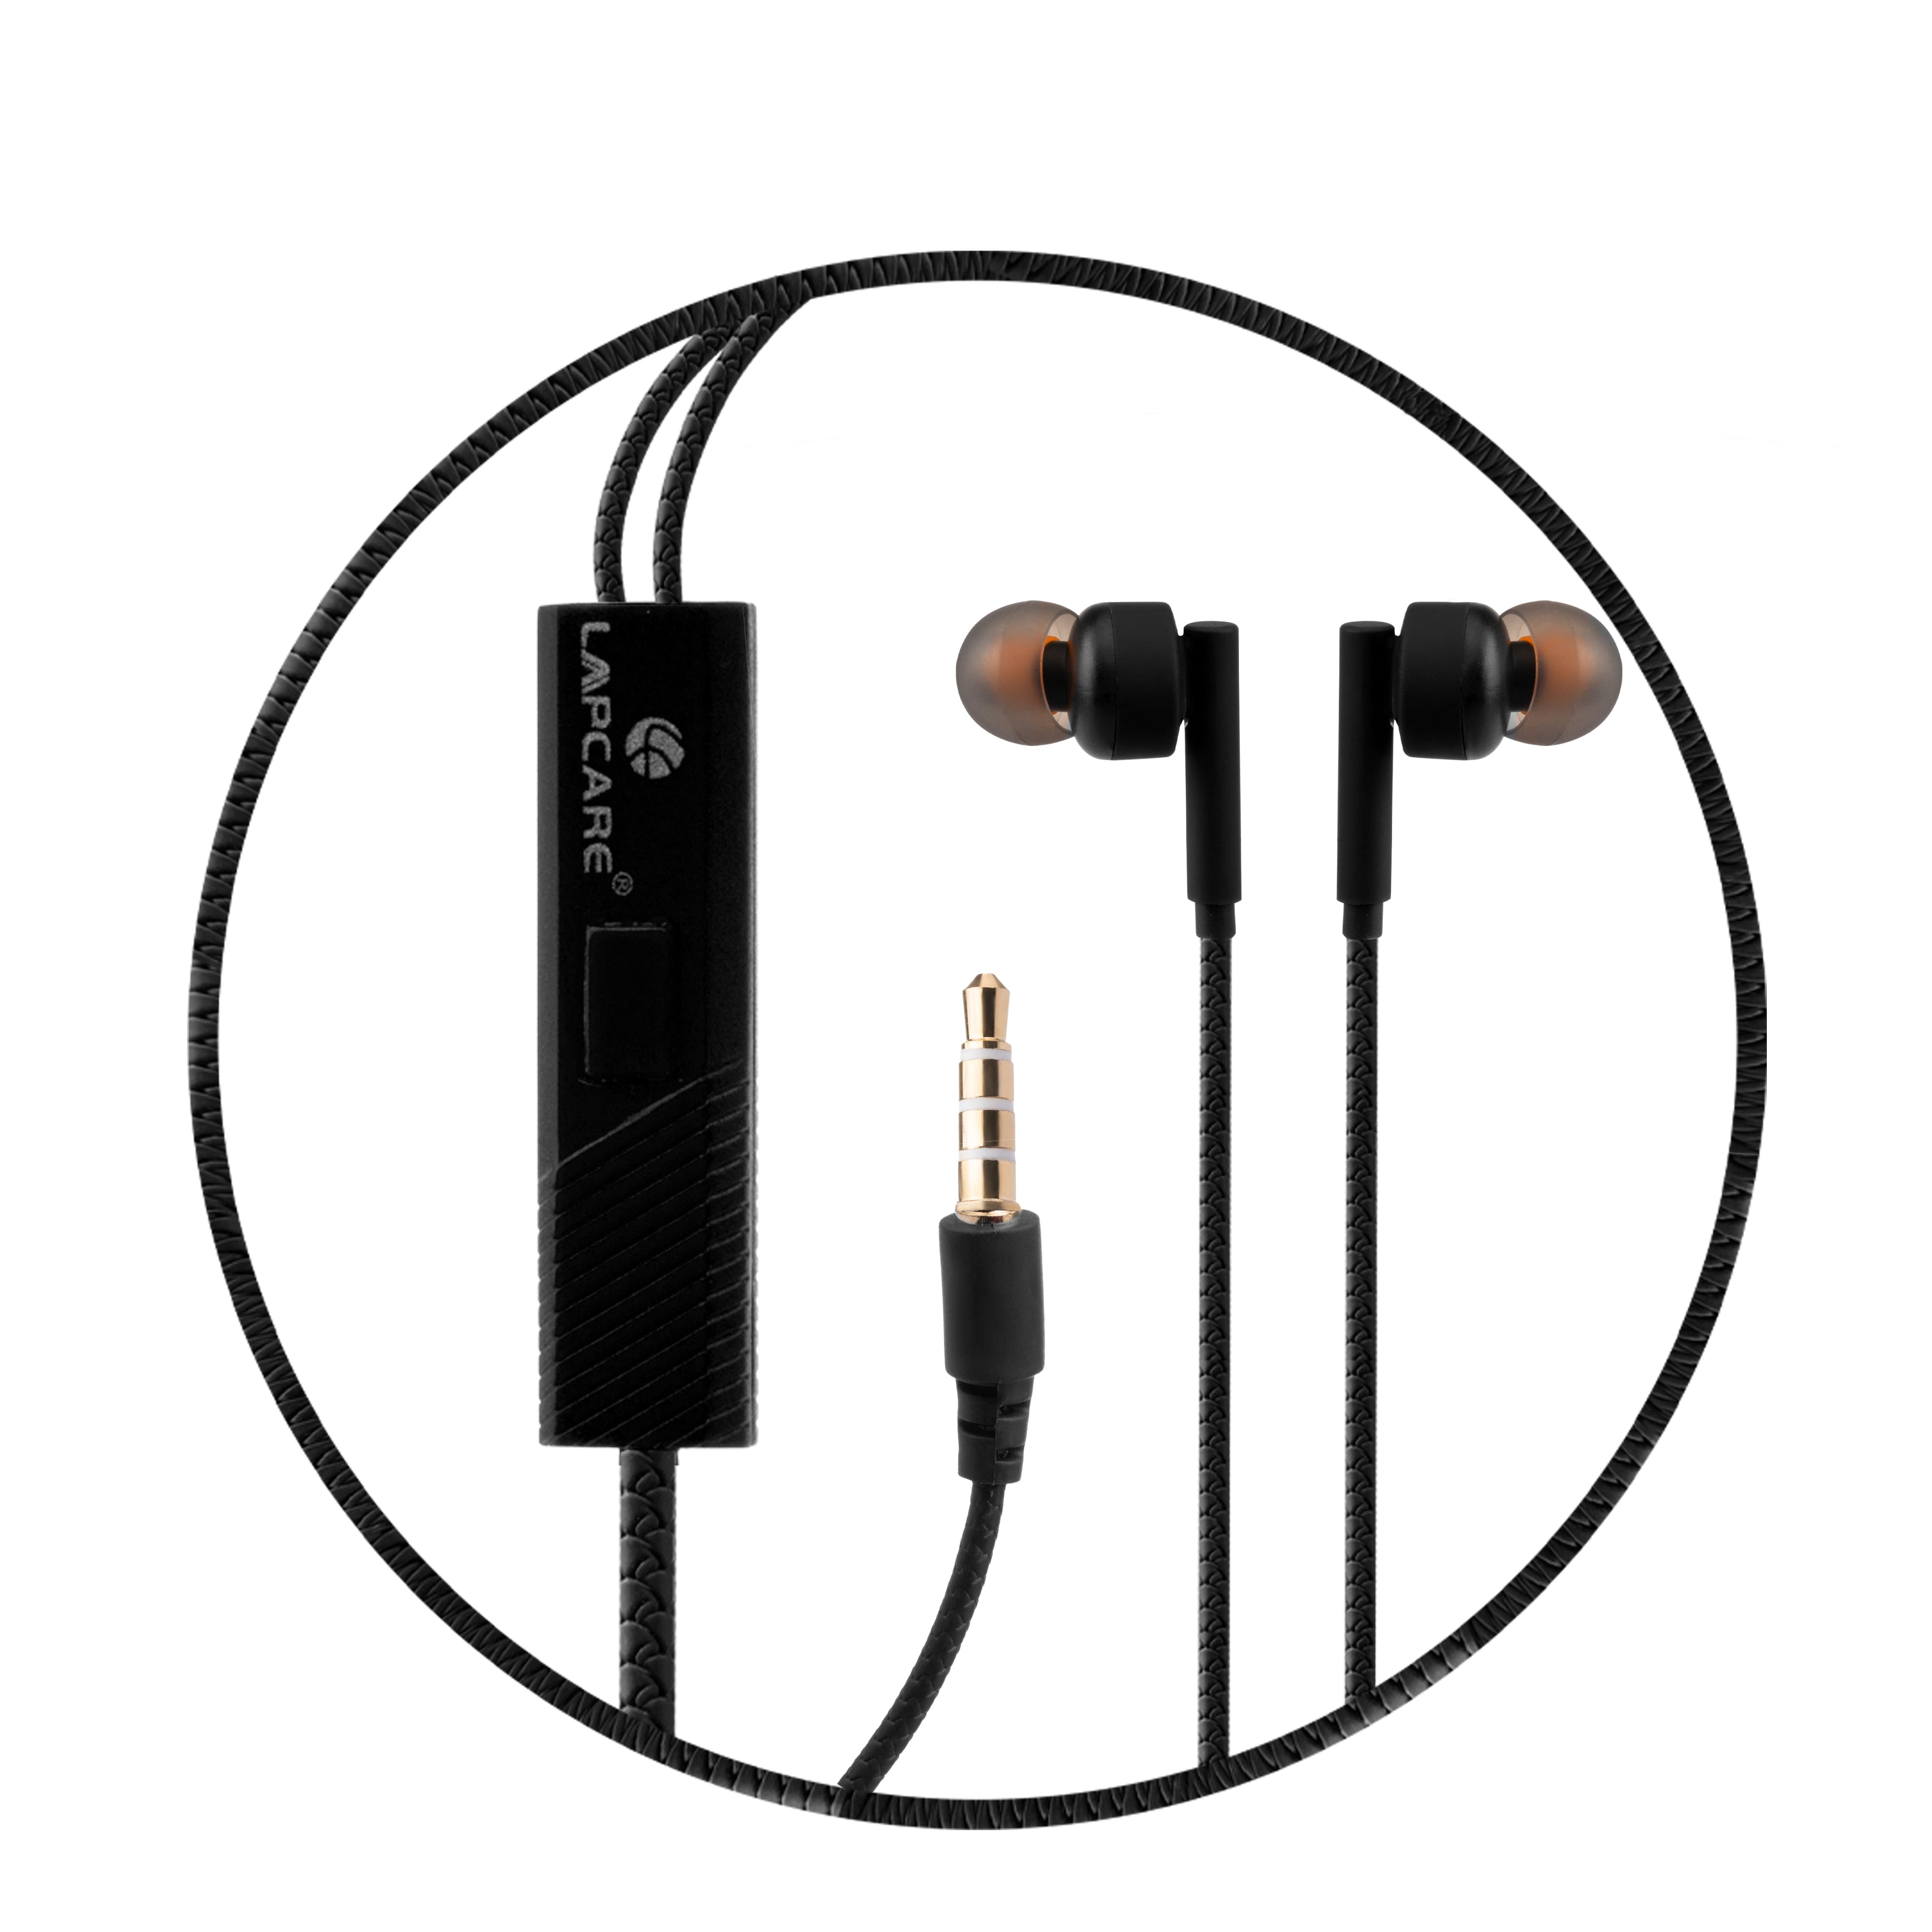 Lapcare WOOBUDS VI wired Earbuds with inbuilt MIC -Black